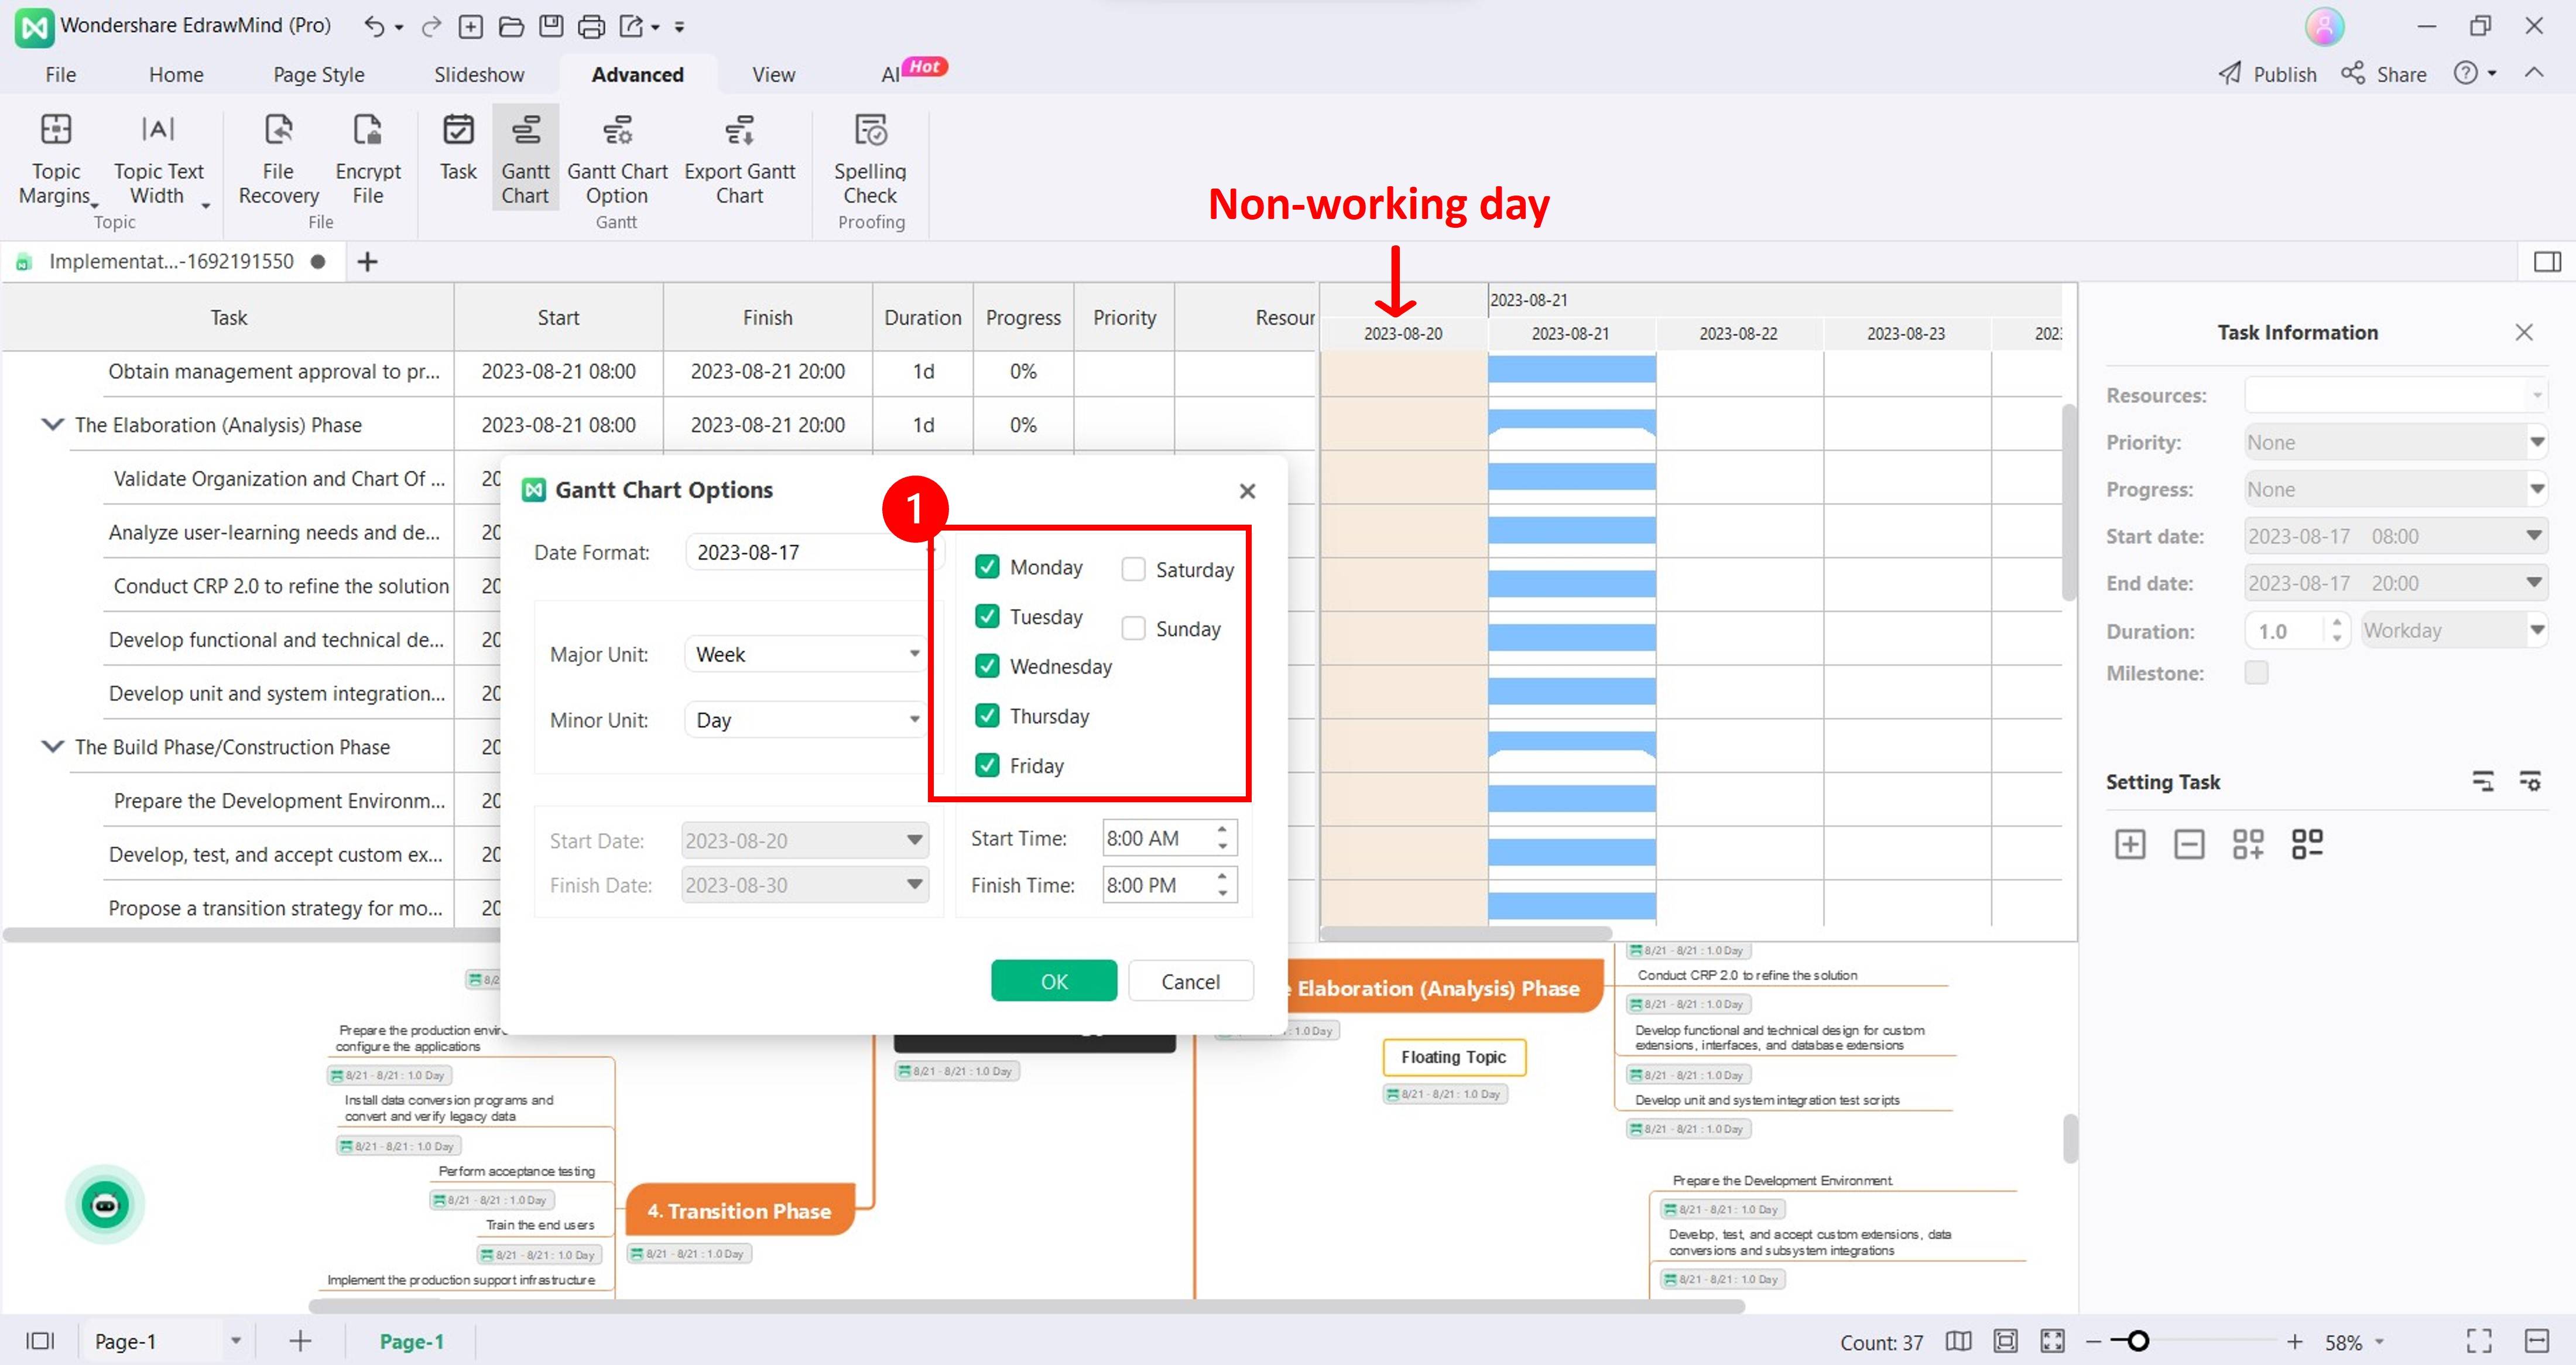 edrawmind set working and non-working days